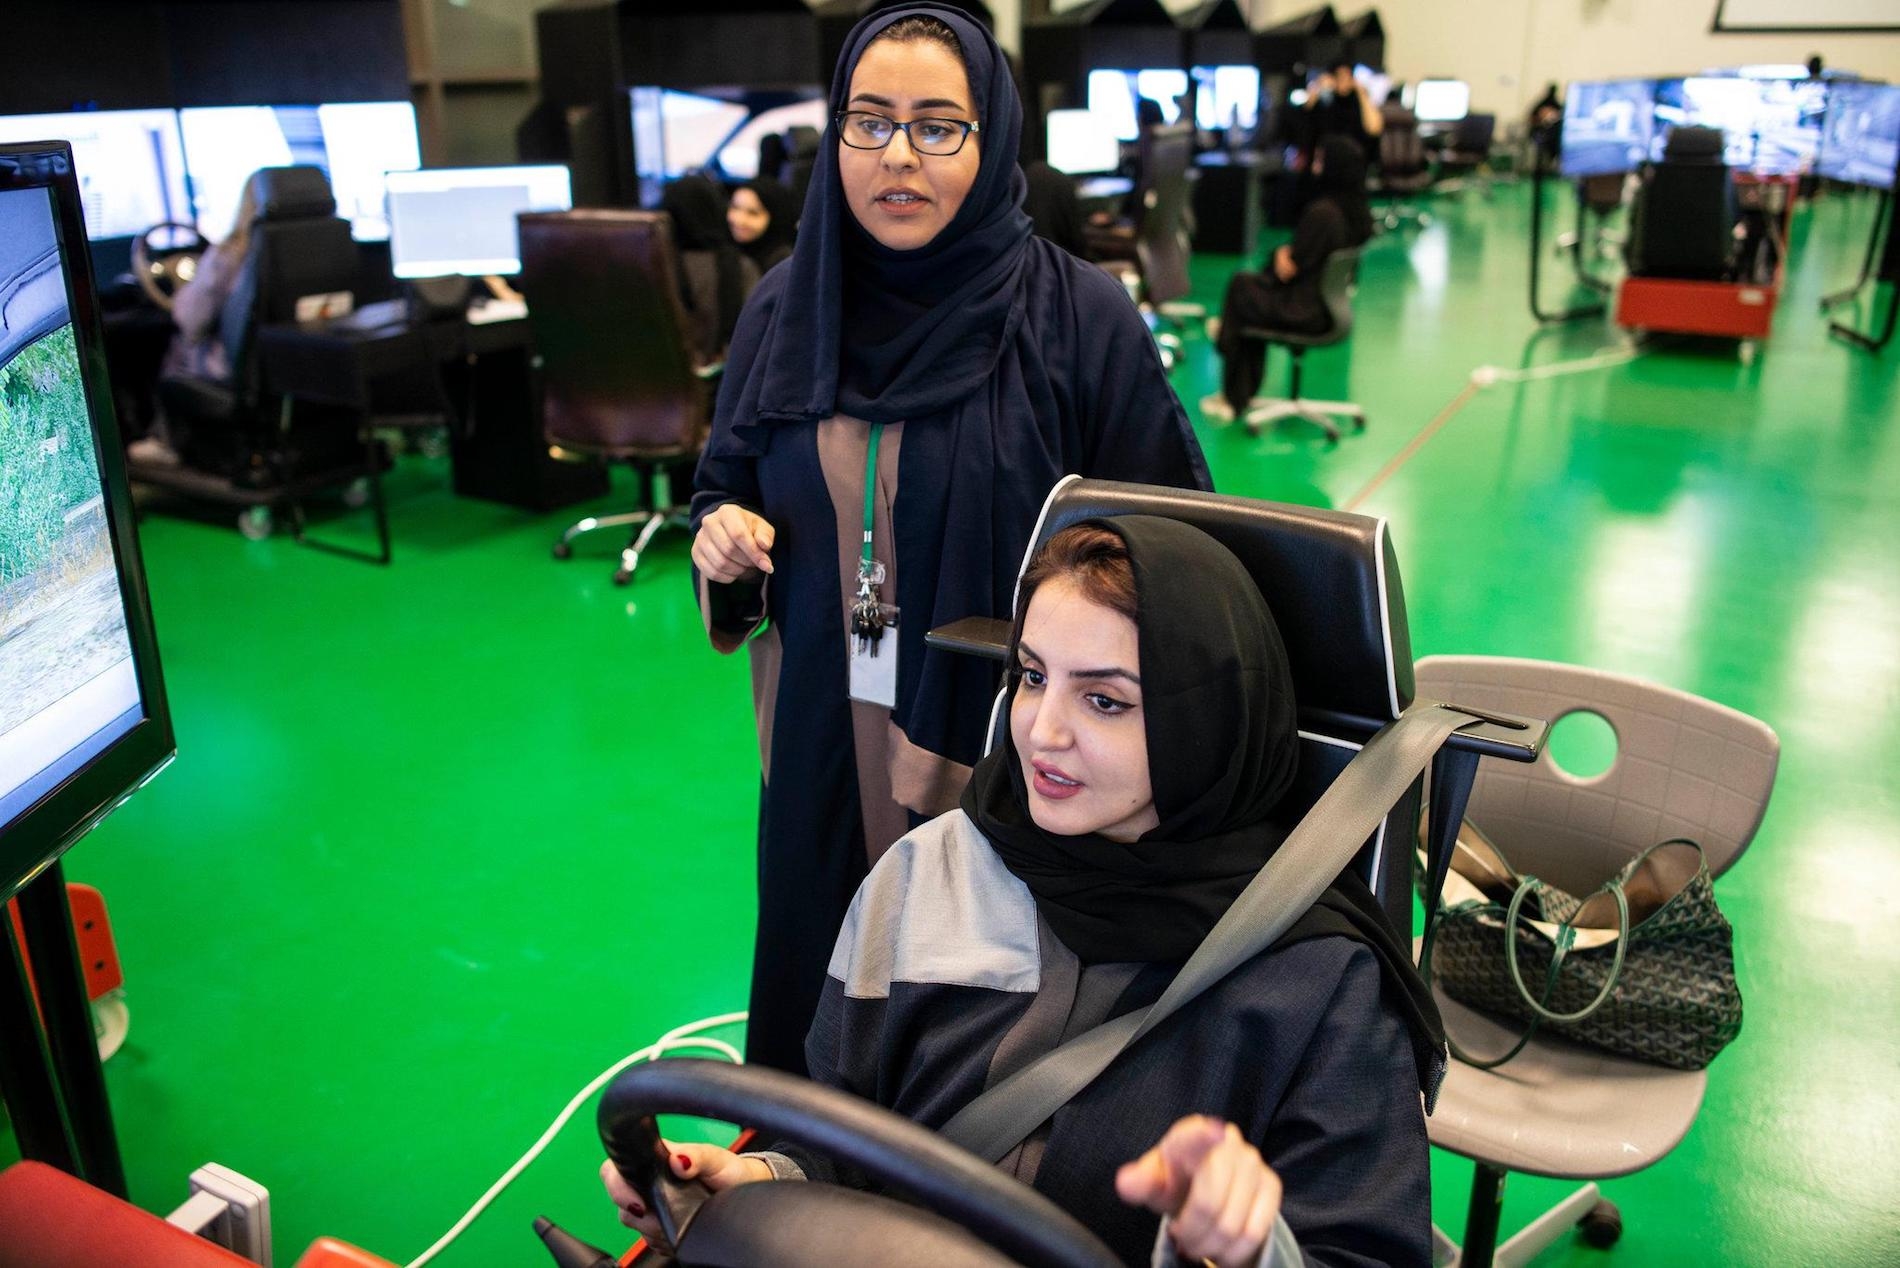 A woman teaches another woman how to drive on a virtual machine.